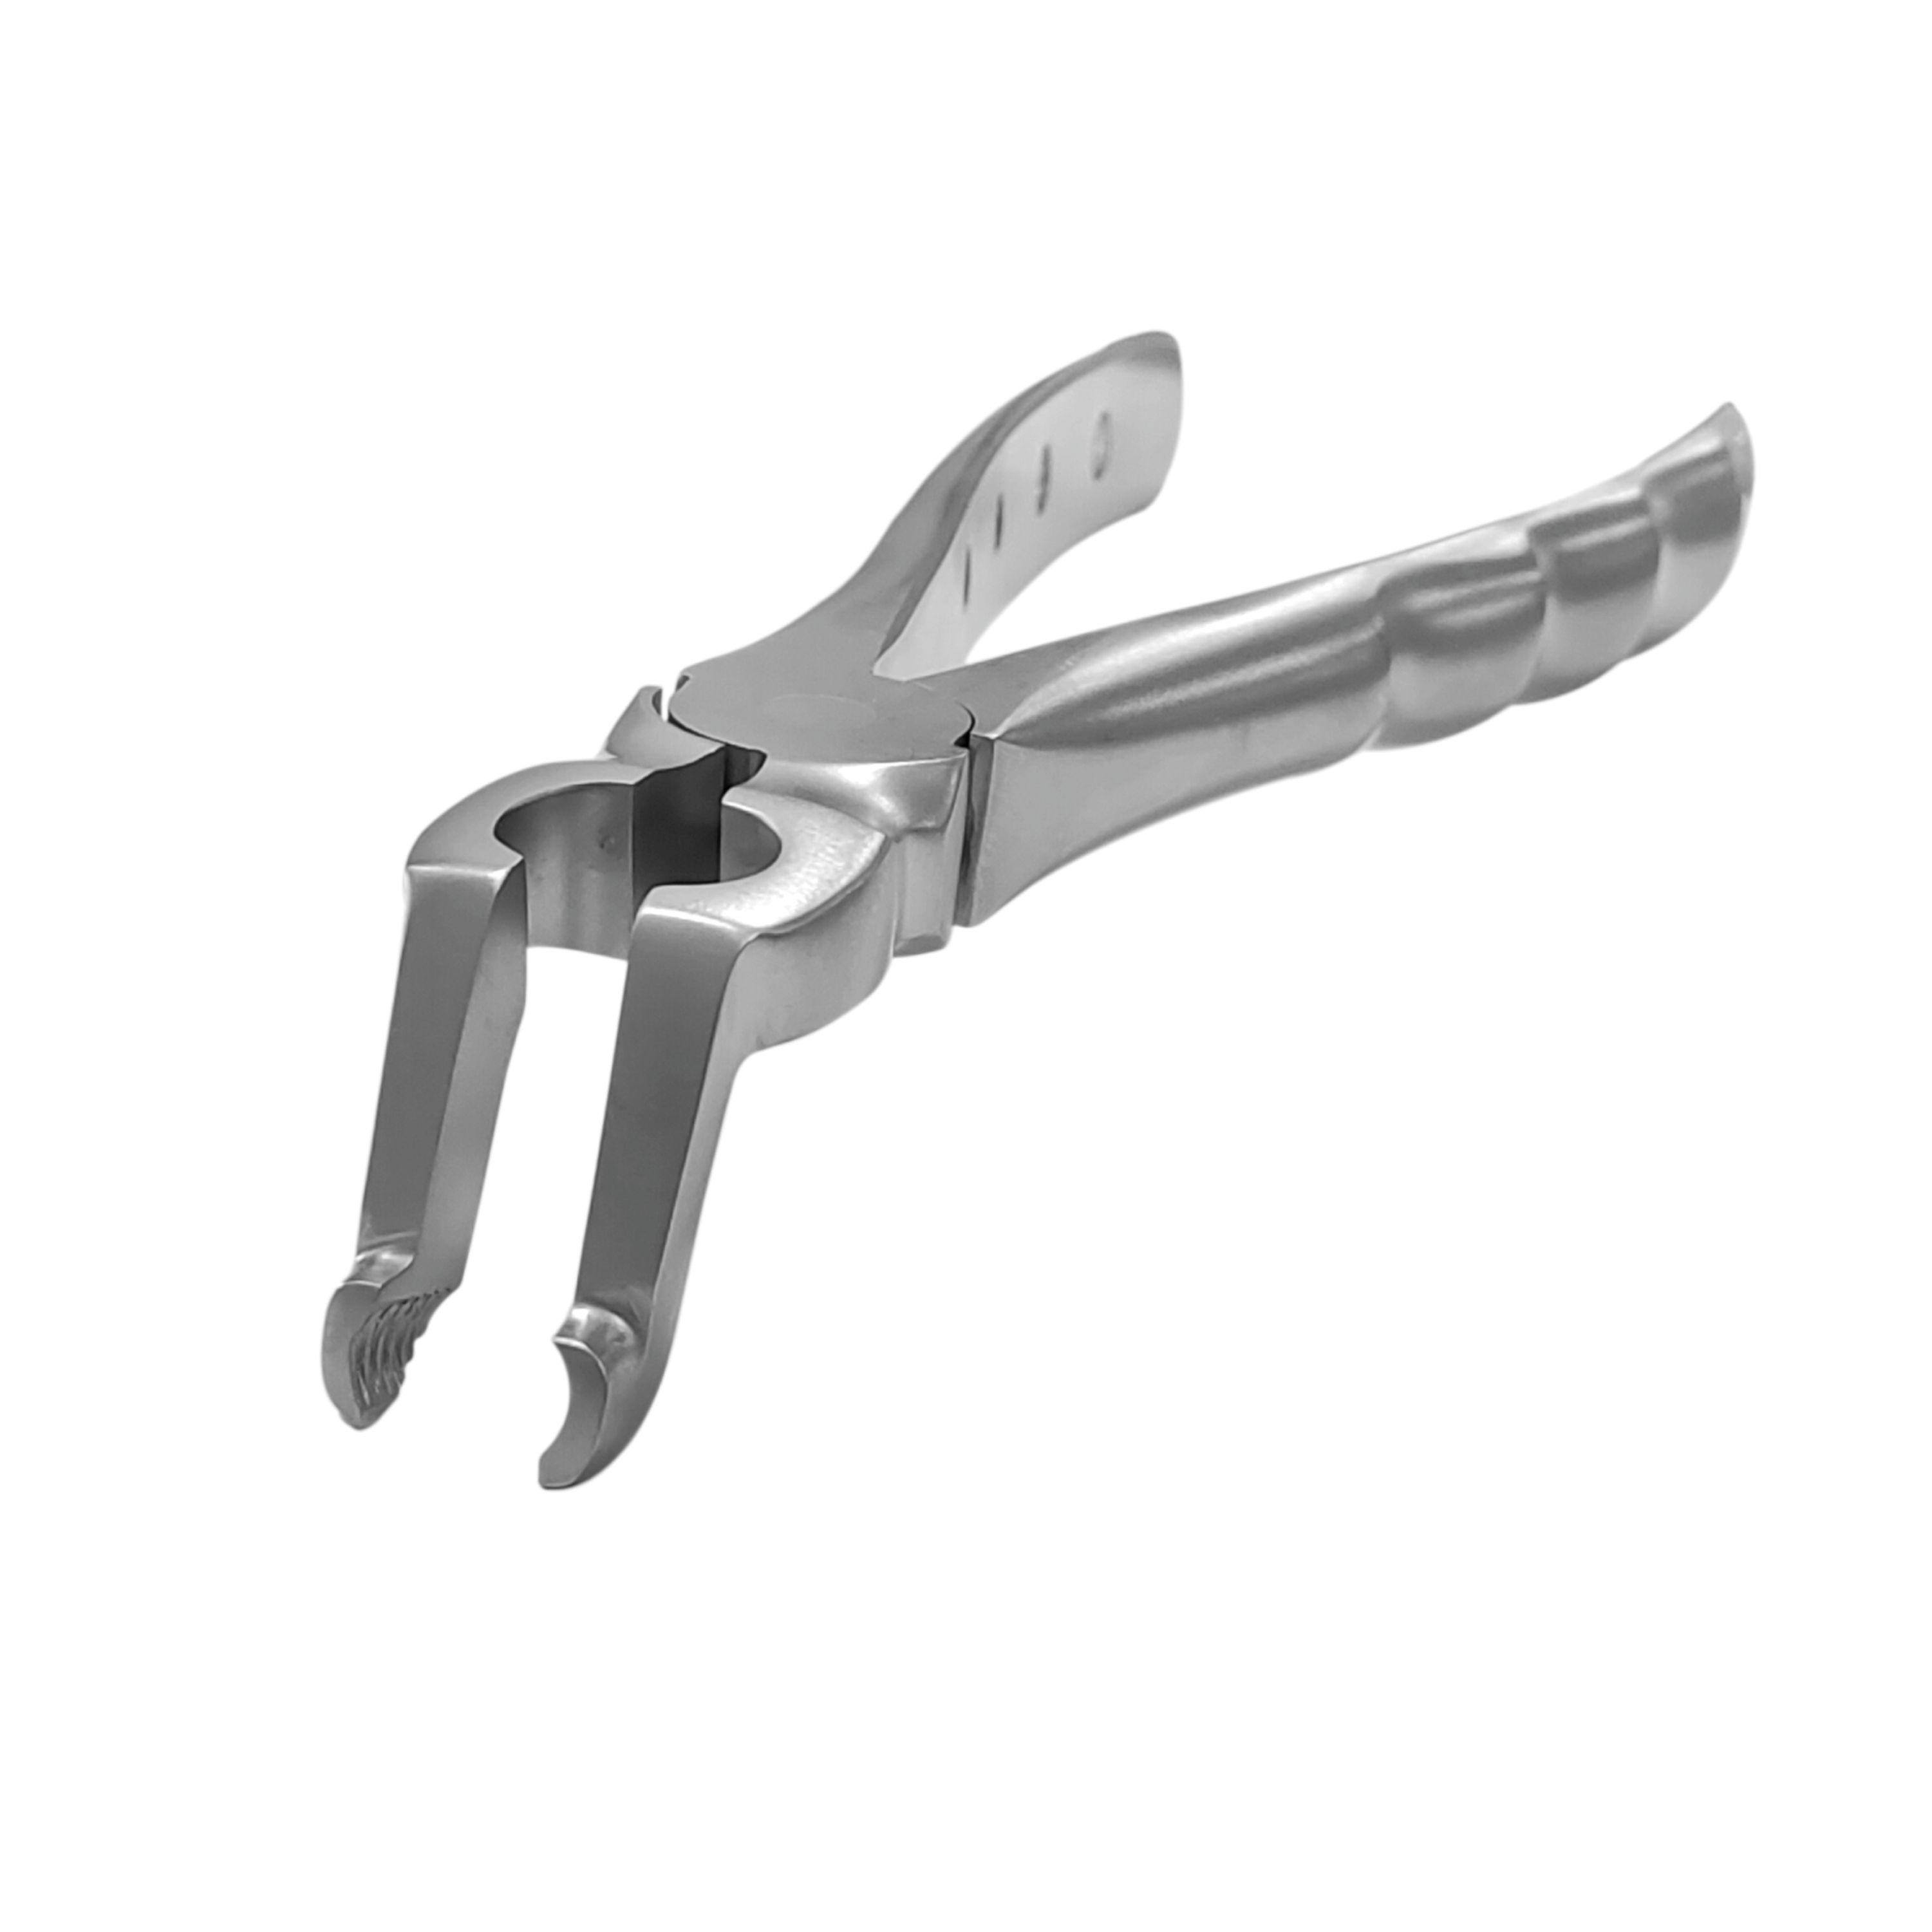 Trust & Care Dr. Comella Extraction Forcep